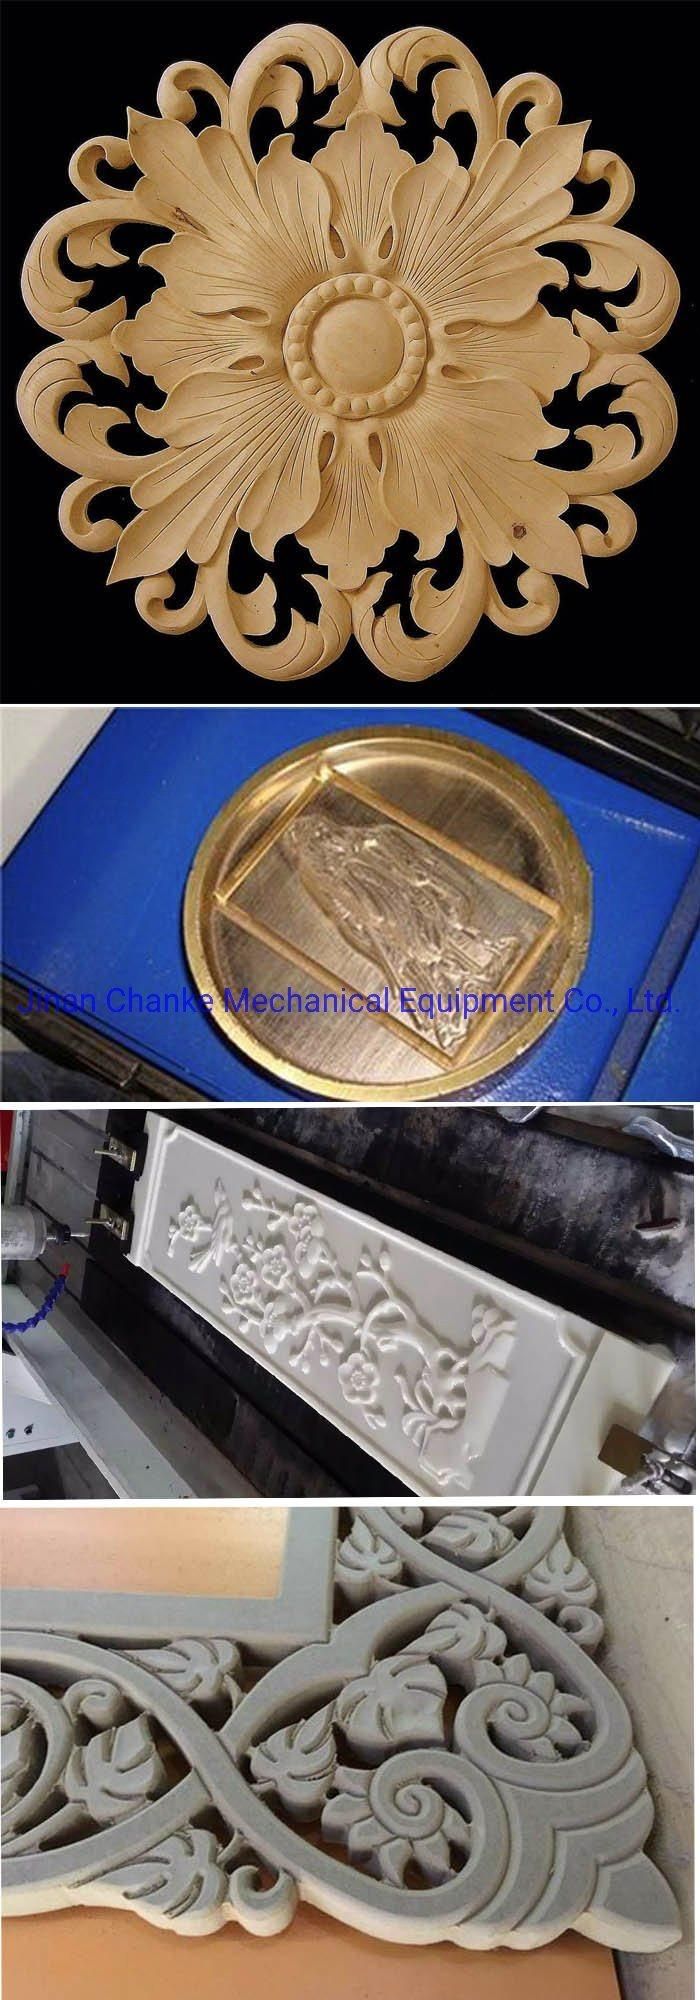 CNC Router Woodworking Router Engraver Machine Acrylic Wood MDF Engraving Cutting Routing 3D CNC Milling